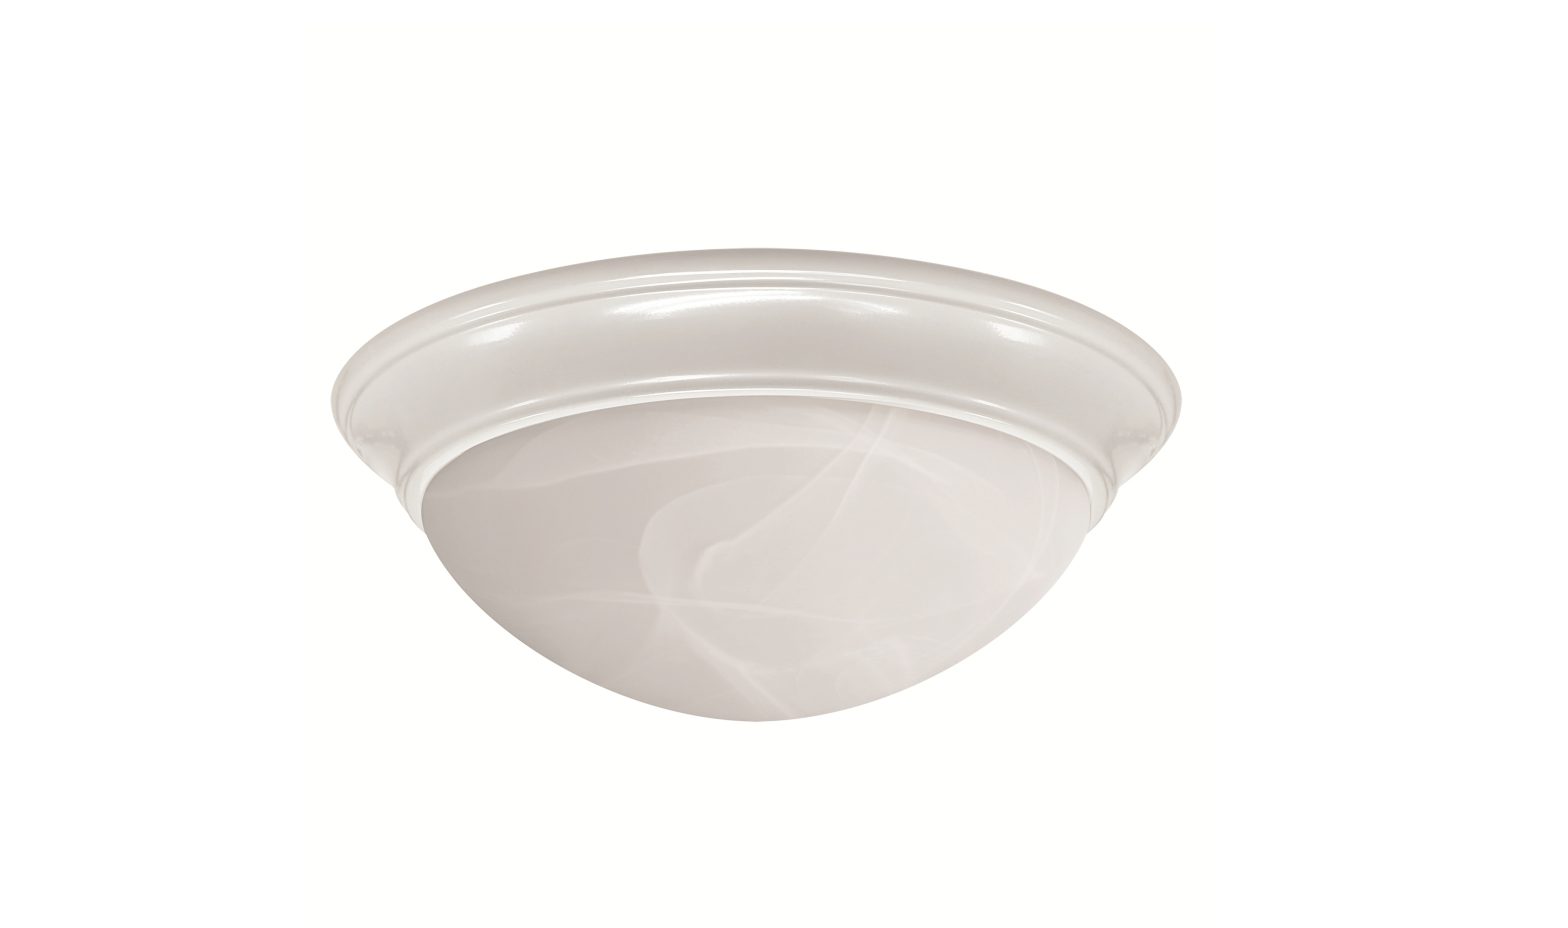 FEIT Electric DOME13-4WY-WH 13 Inch White Round Ceiling Fixture Instruction Manual